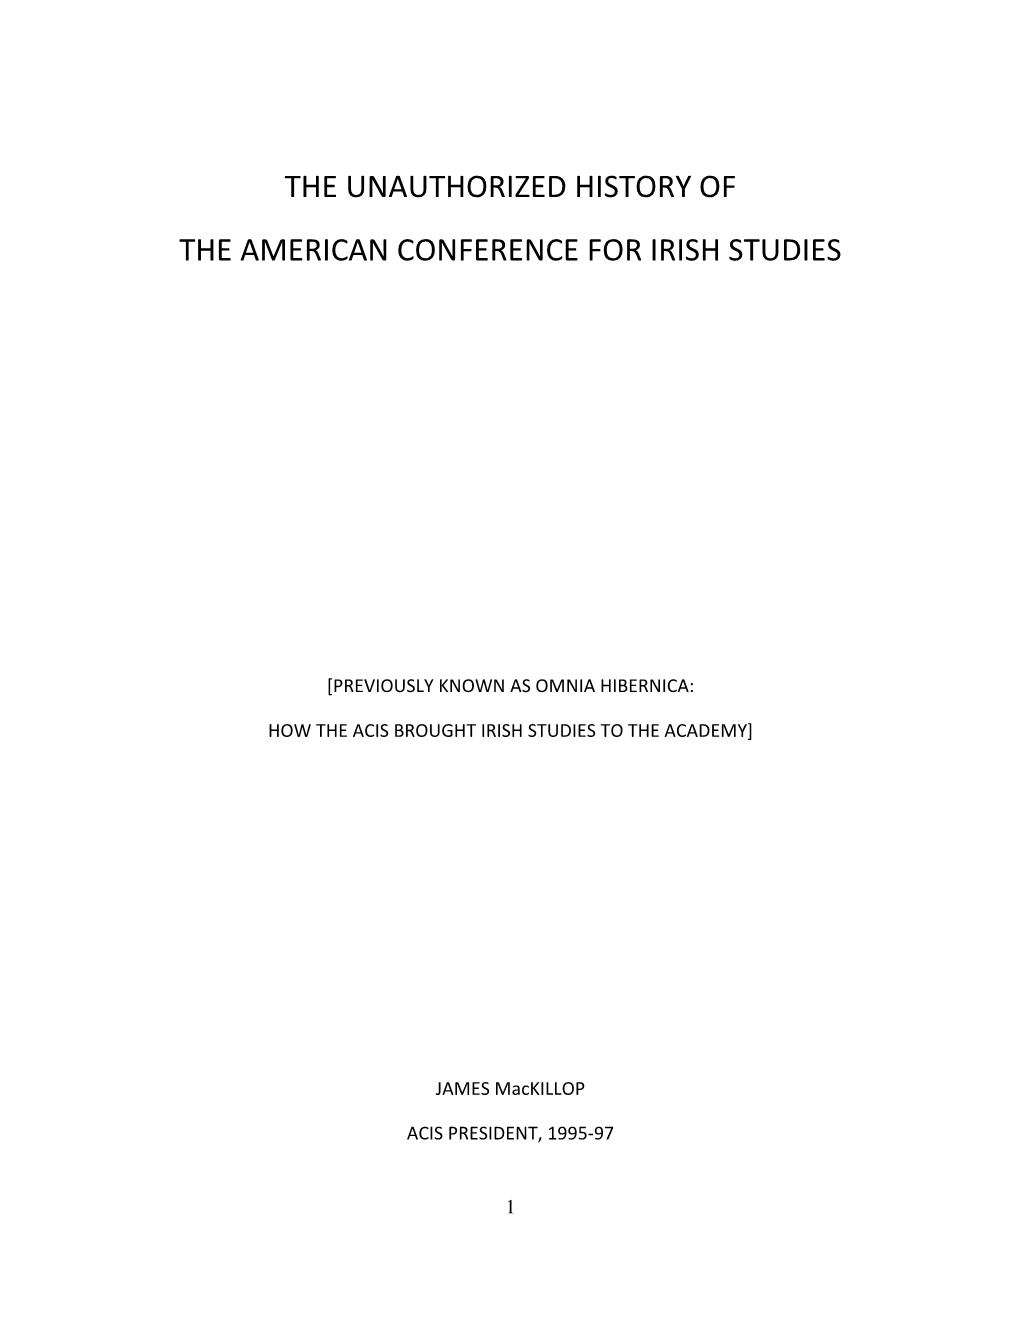 The Unauthorized History of the American Conference for Irish Studies